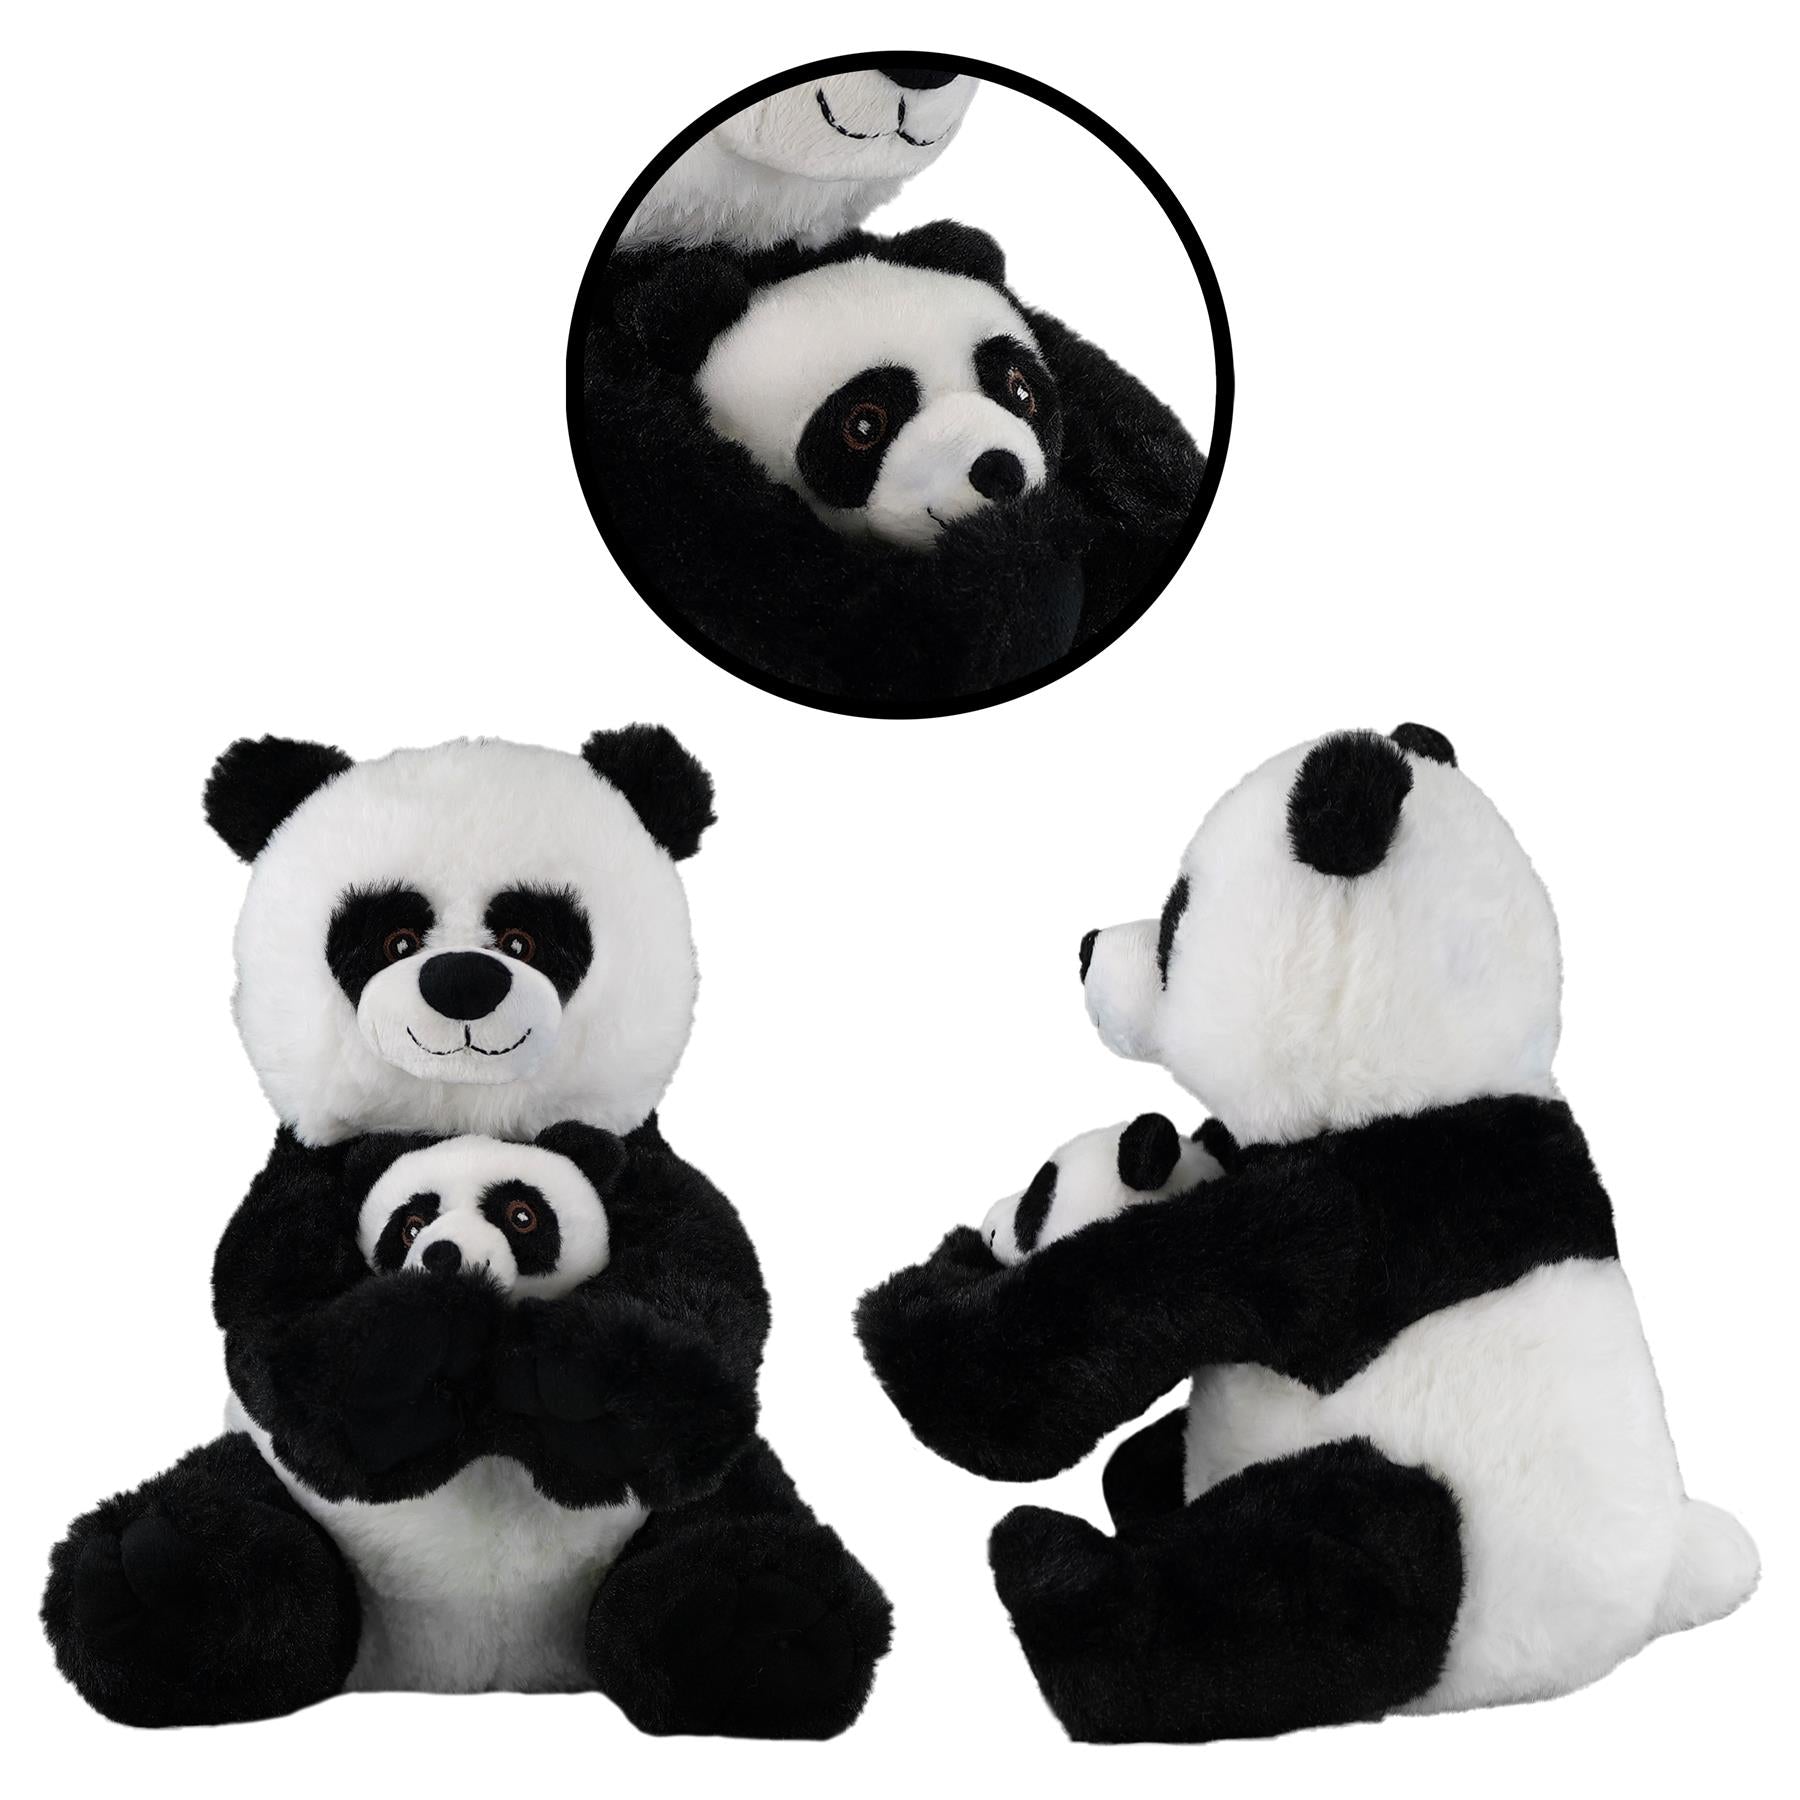 Super Soft Mommy & Baby Panda Plush Toy by The Magic Toy Shop - The Magic Toy Shop